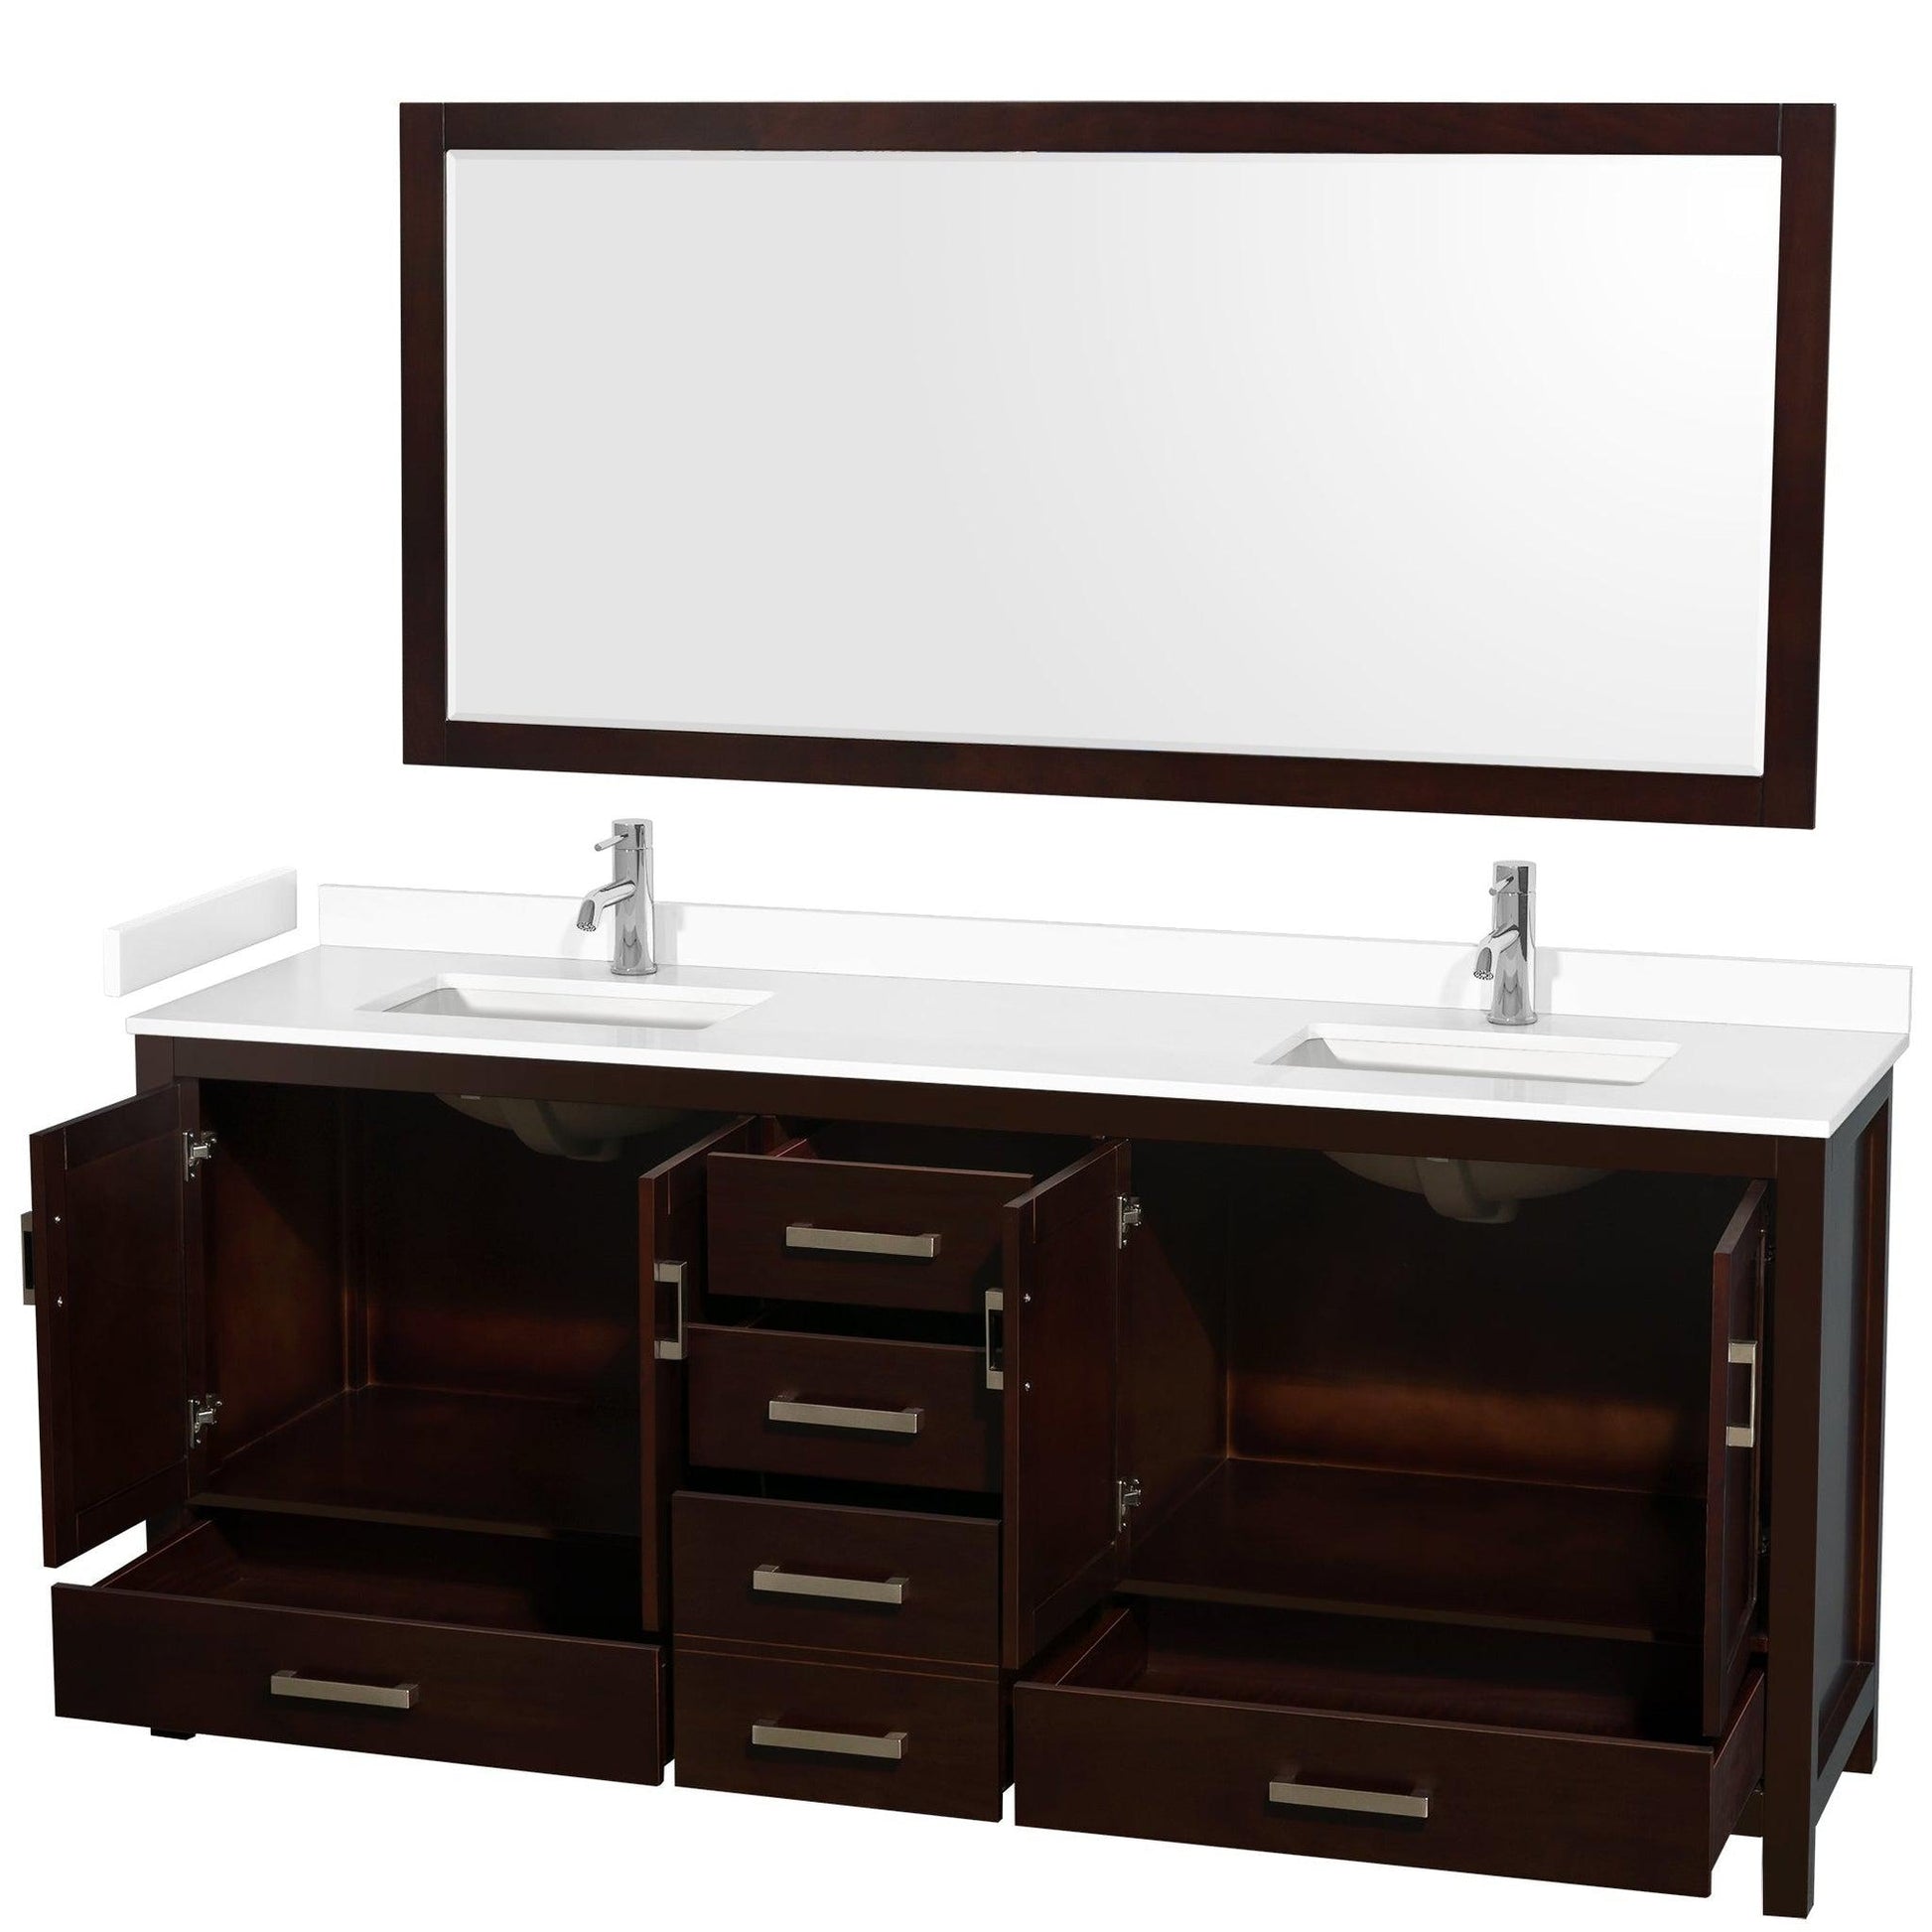 Wyndham Collection Sheffield 80" Double Bathroom Vanity in Espresso, White Cultured Marble Countertop, Undermount Square Sinks, 70" Mirror